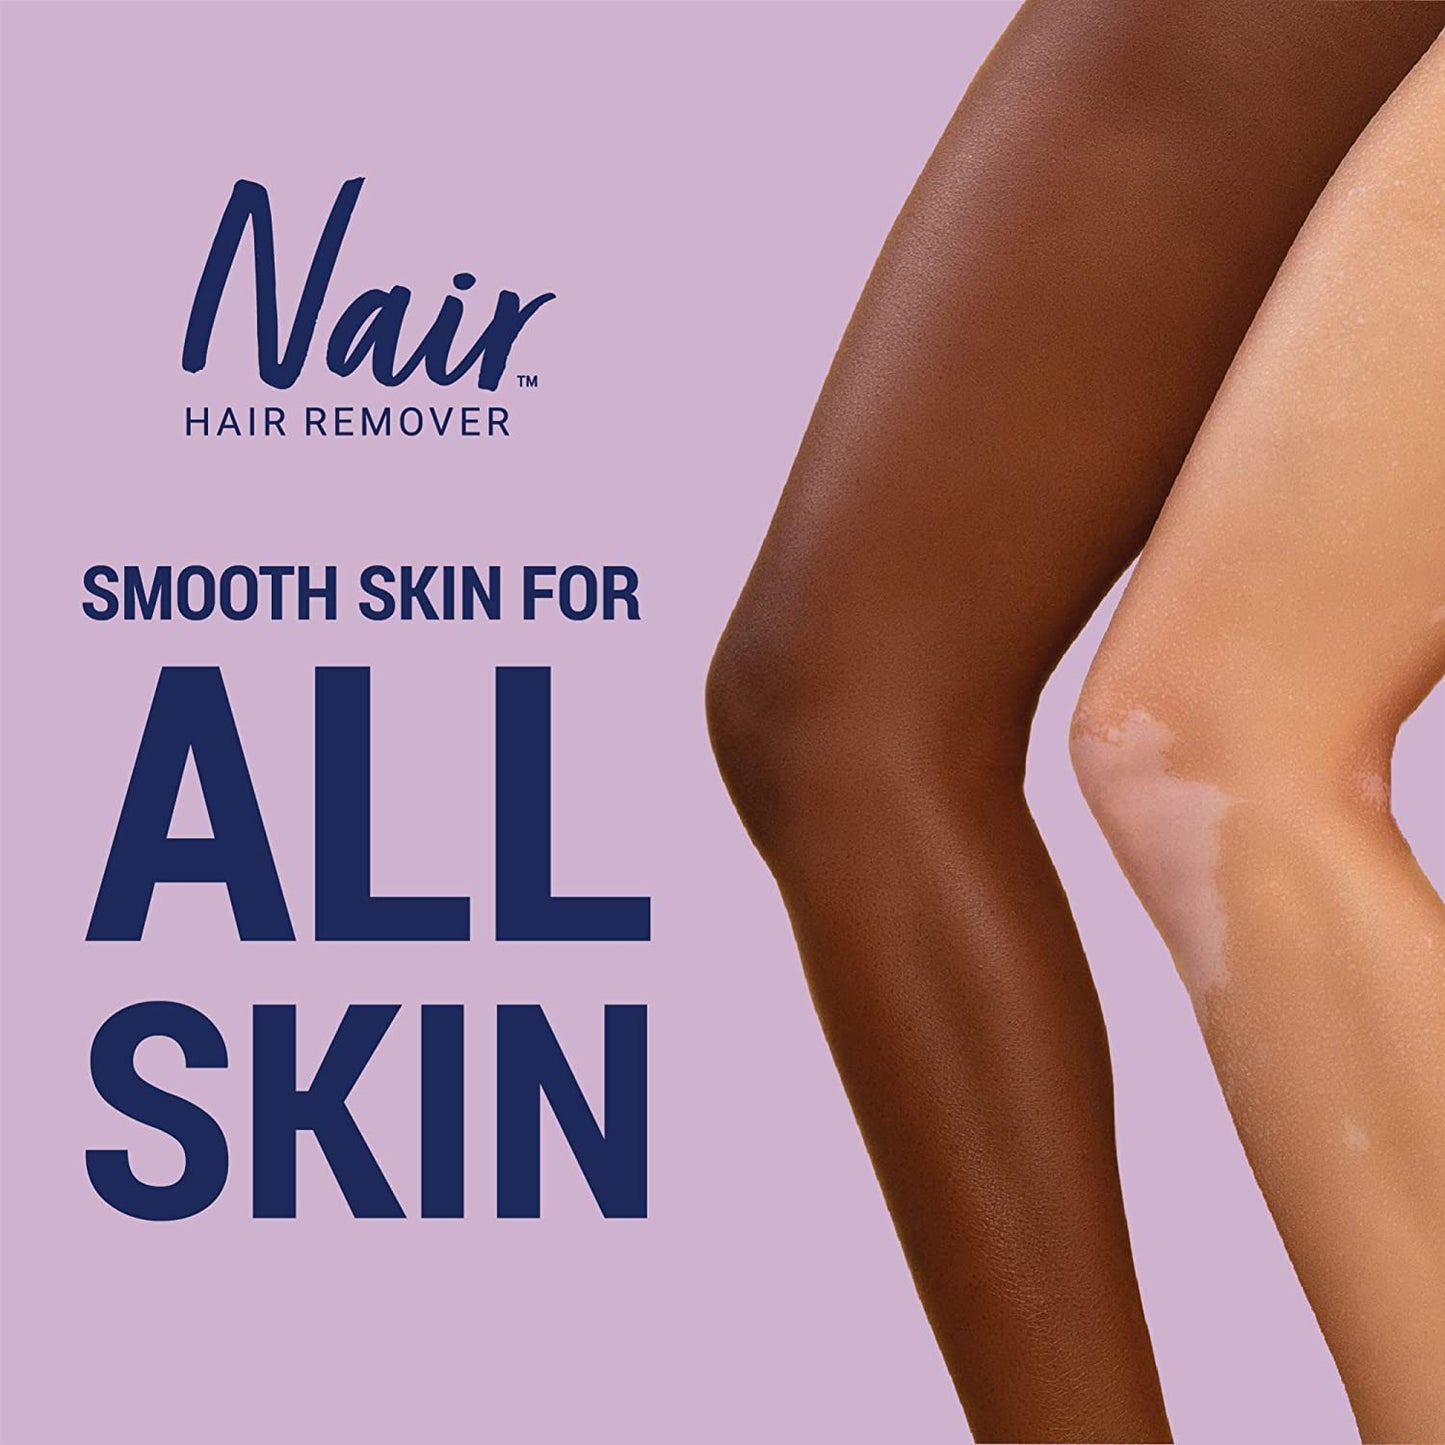 Nair Body Cream Hair Remover Rich Cocoa Butter & Vitamin E Smooth Skin For Days - 255g